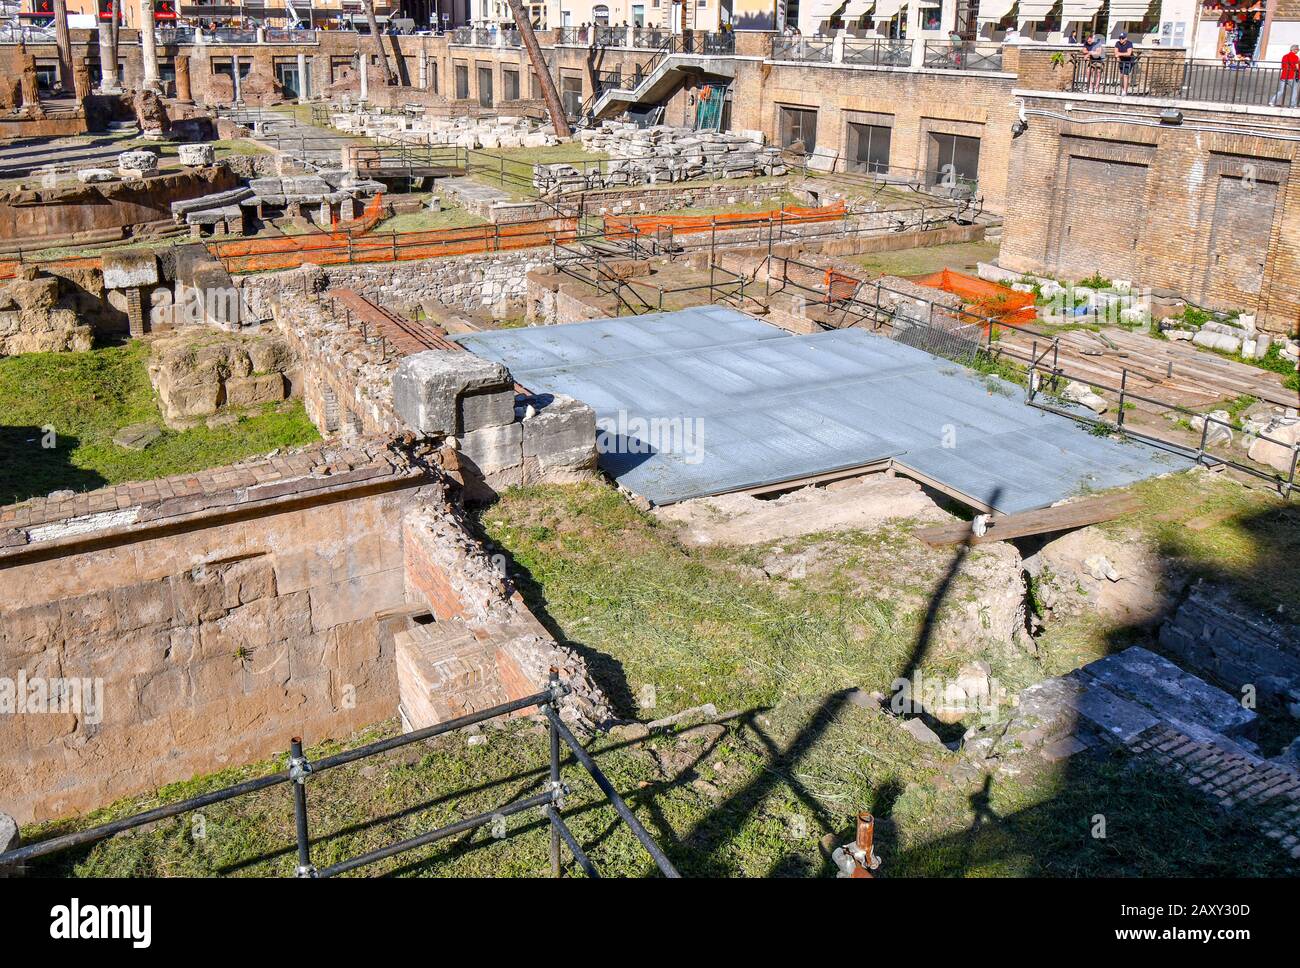 Largo di Torre Argentina, the ancient ruins of Pompey's Theatre at Campus Martius excavated in central Rome, now also home to a cat sanctuary. Stock Photo